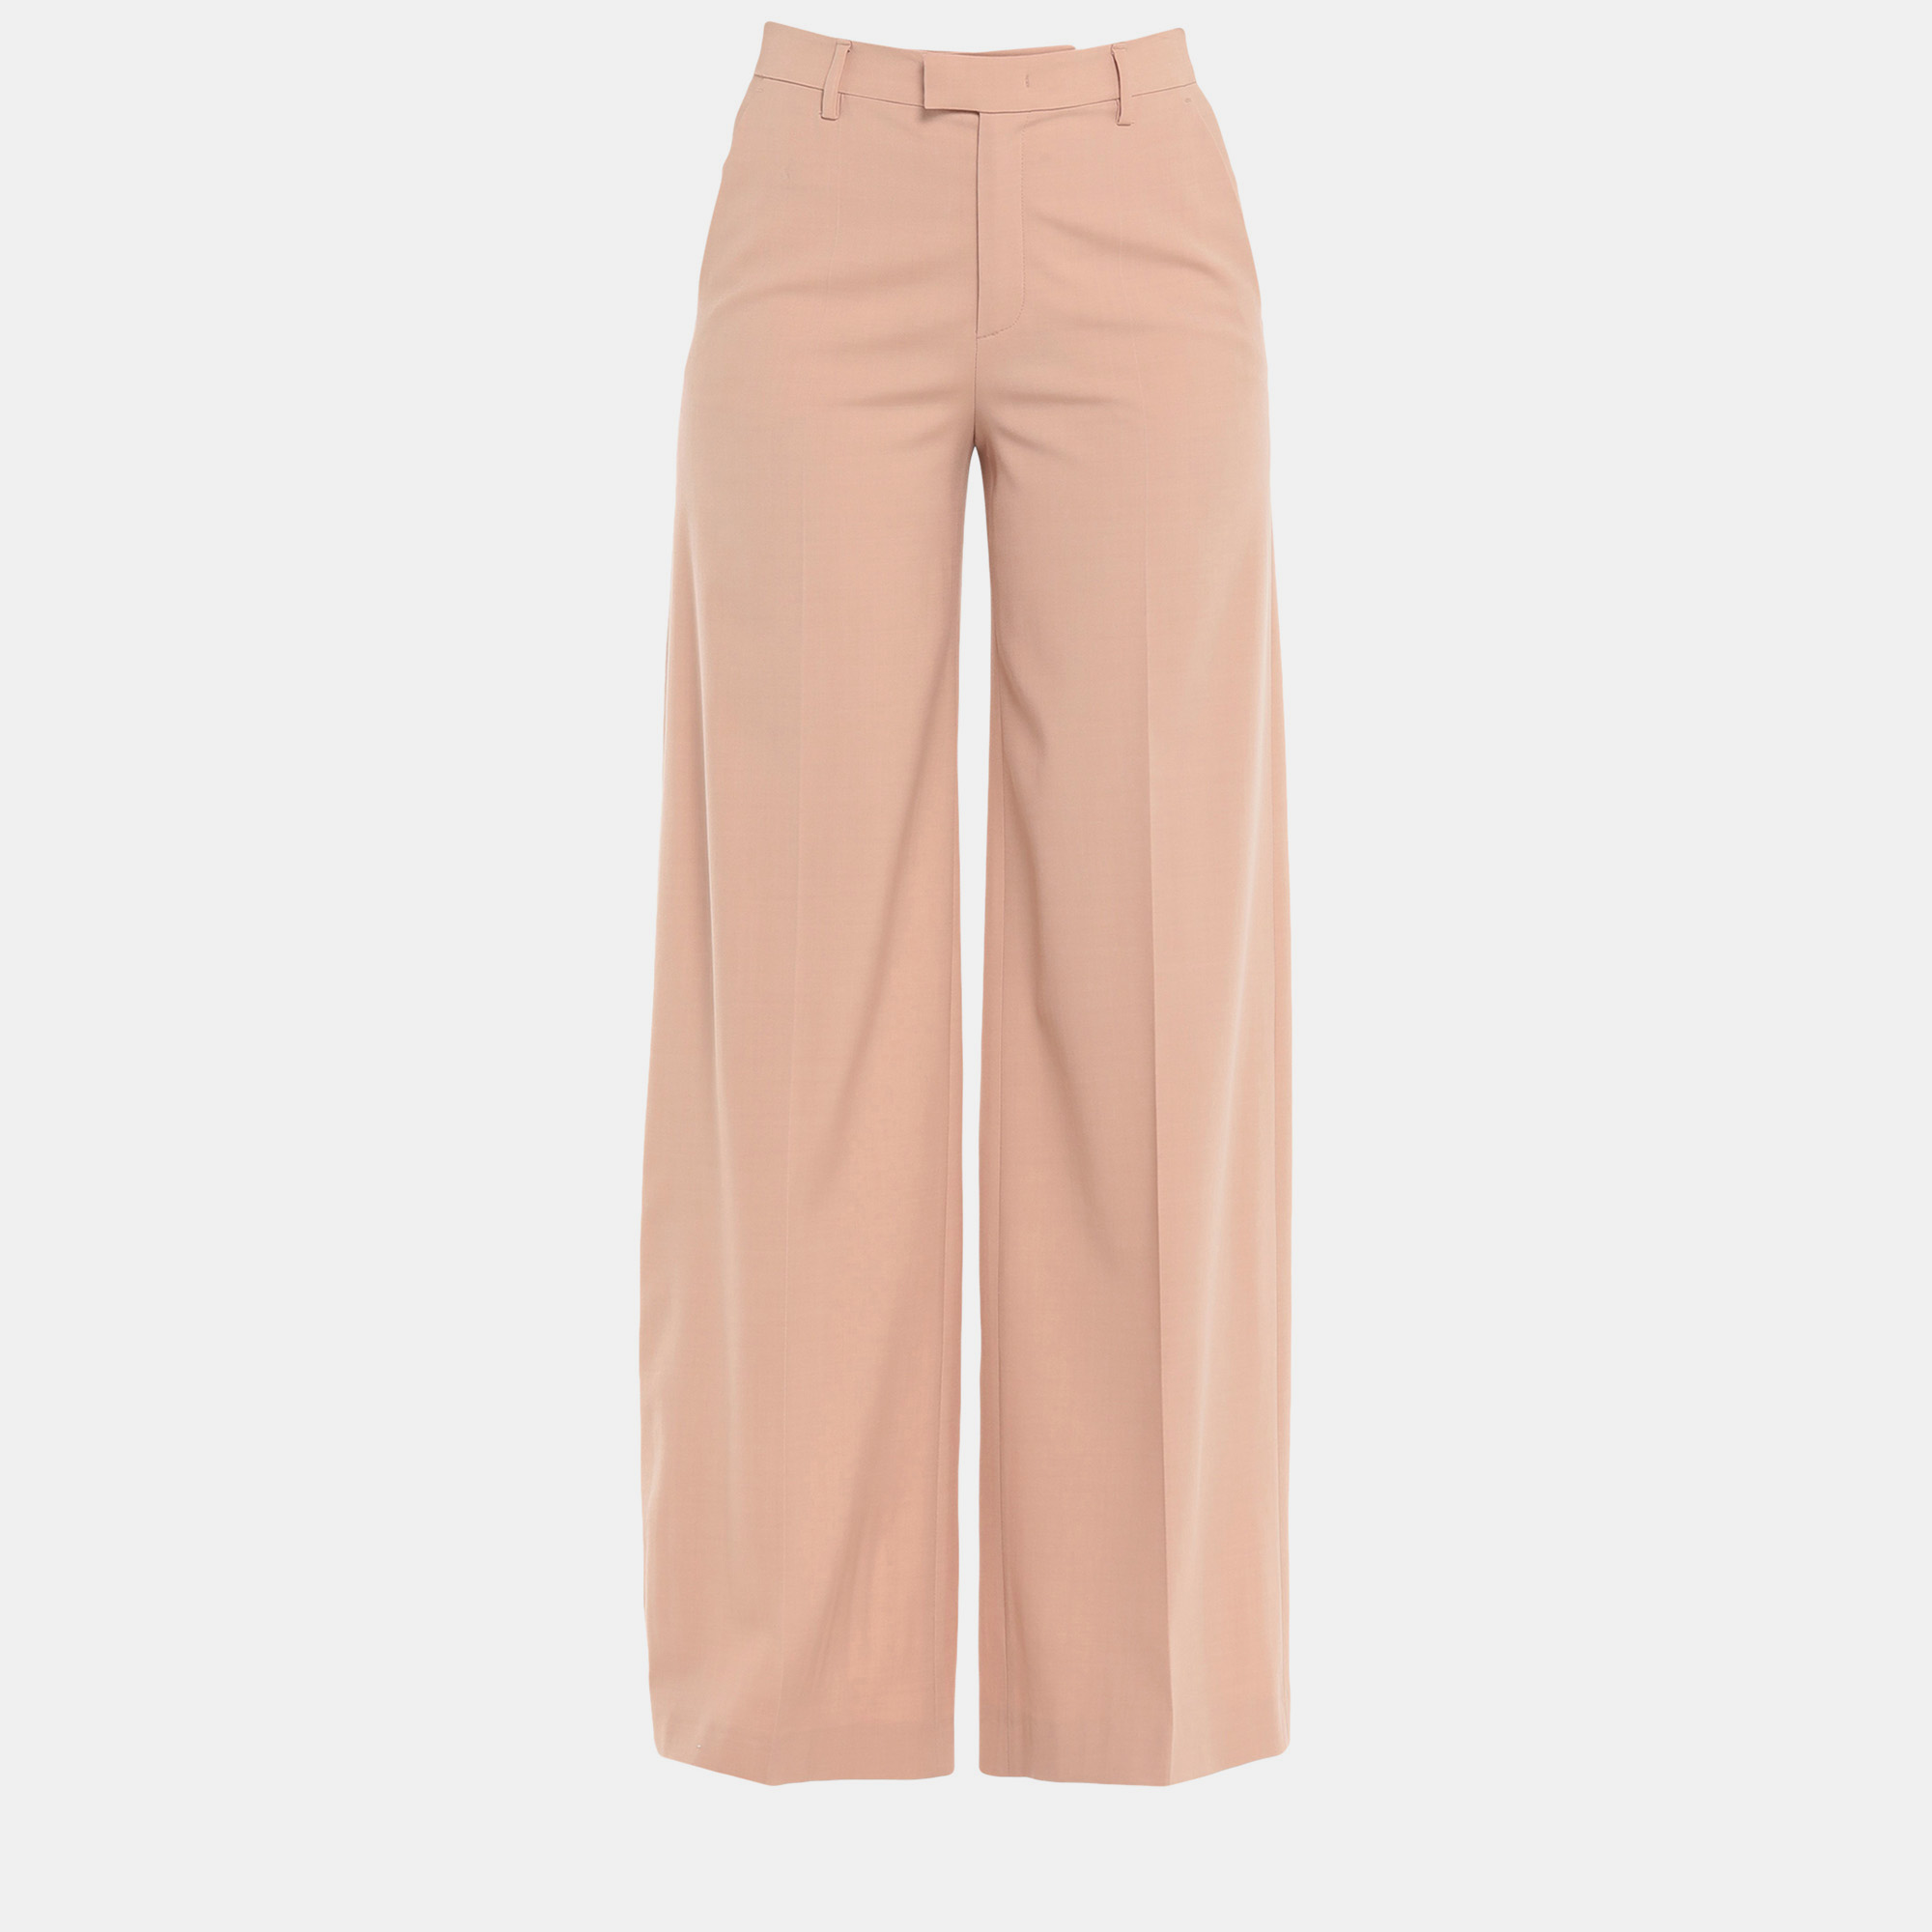 

Red Valentino Pink Wool Blend Wide Leg Pants  (IT 38